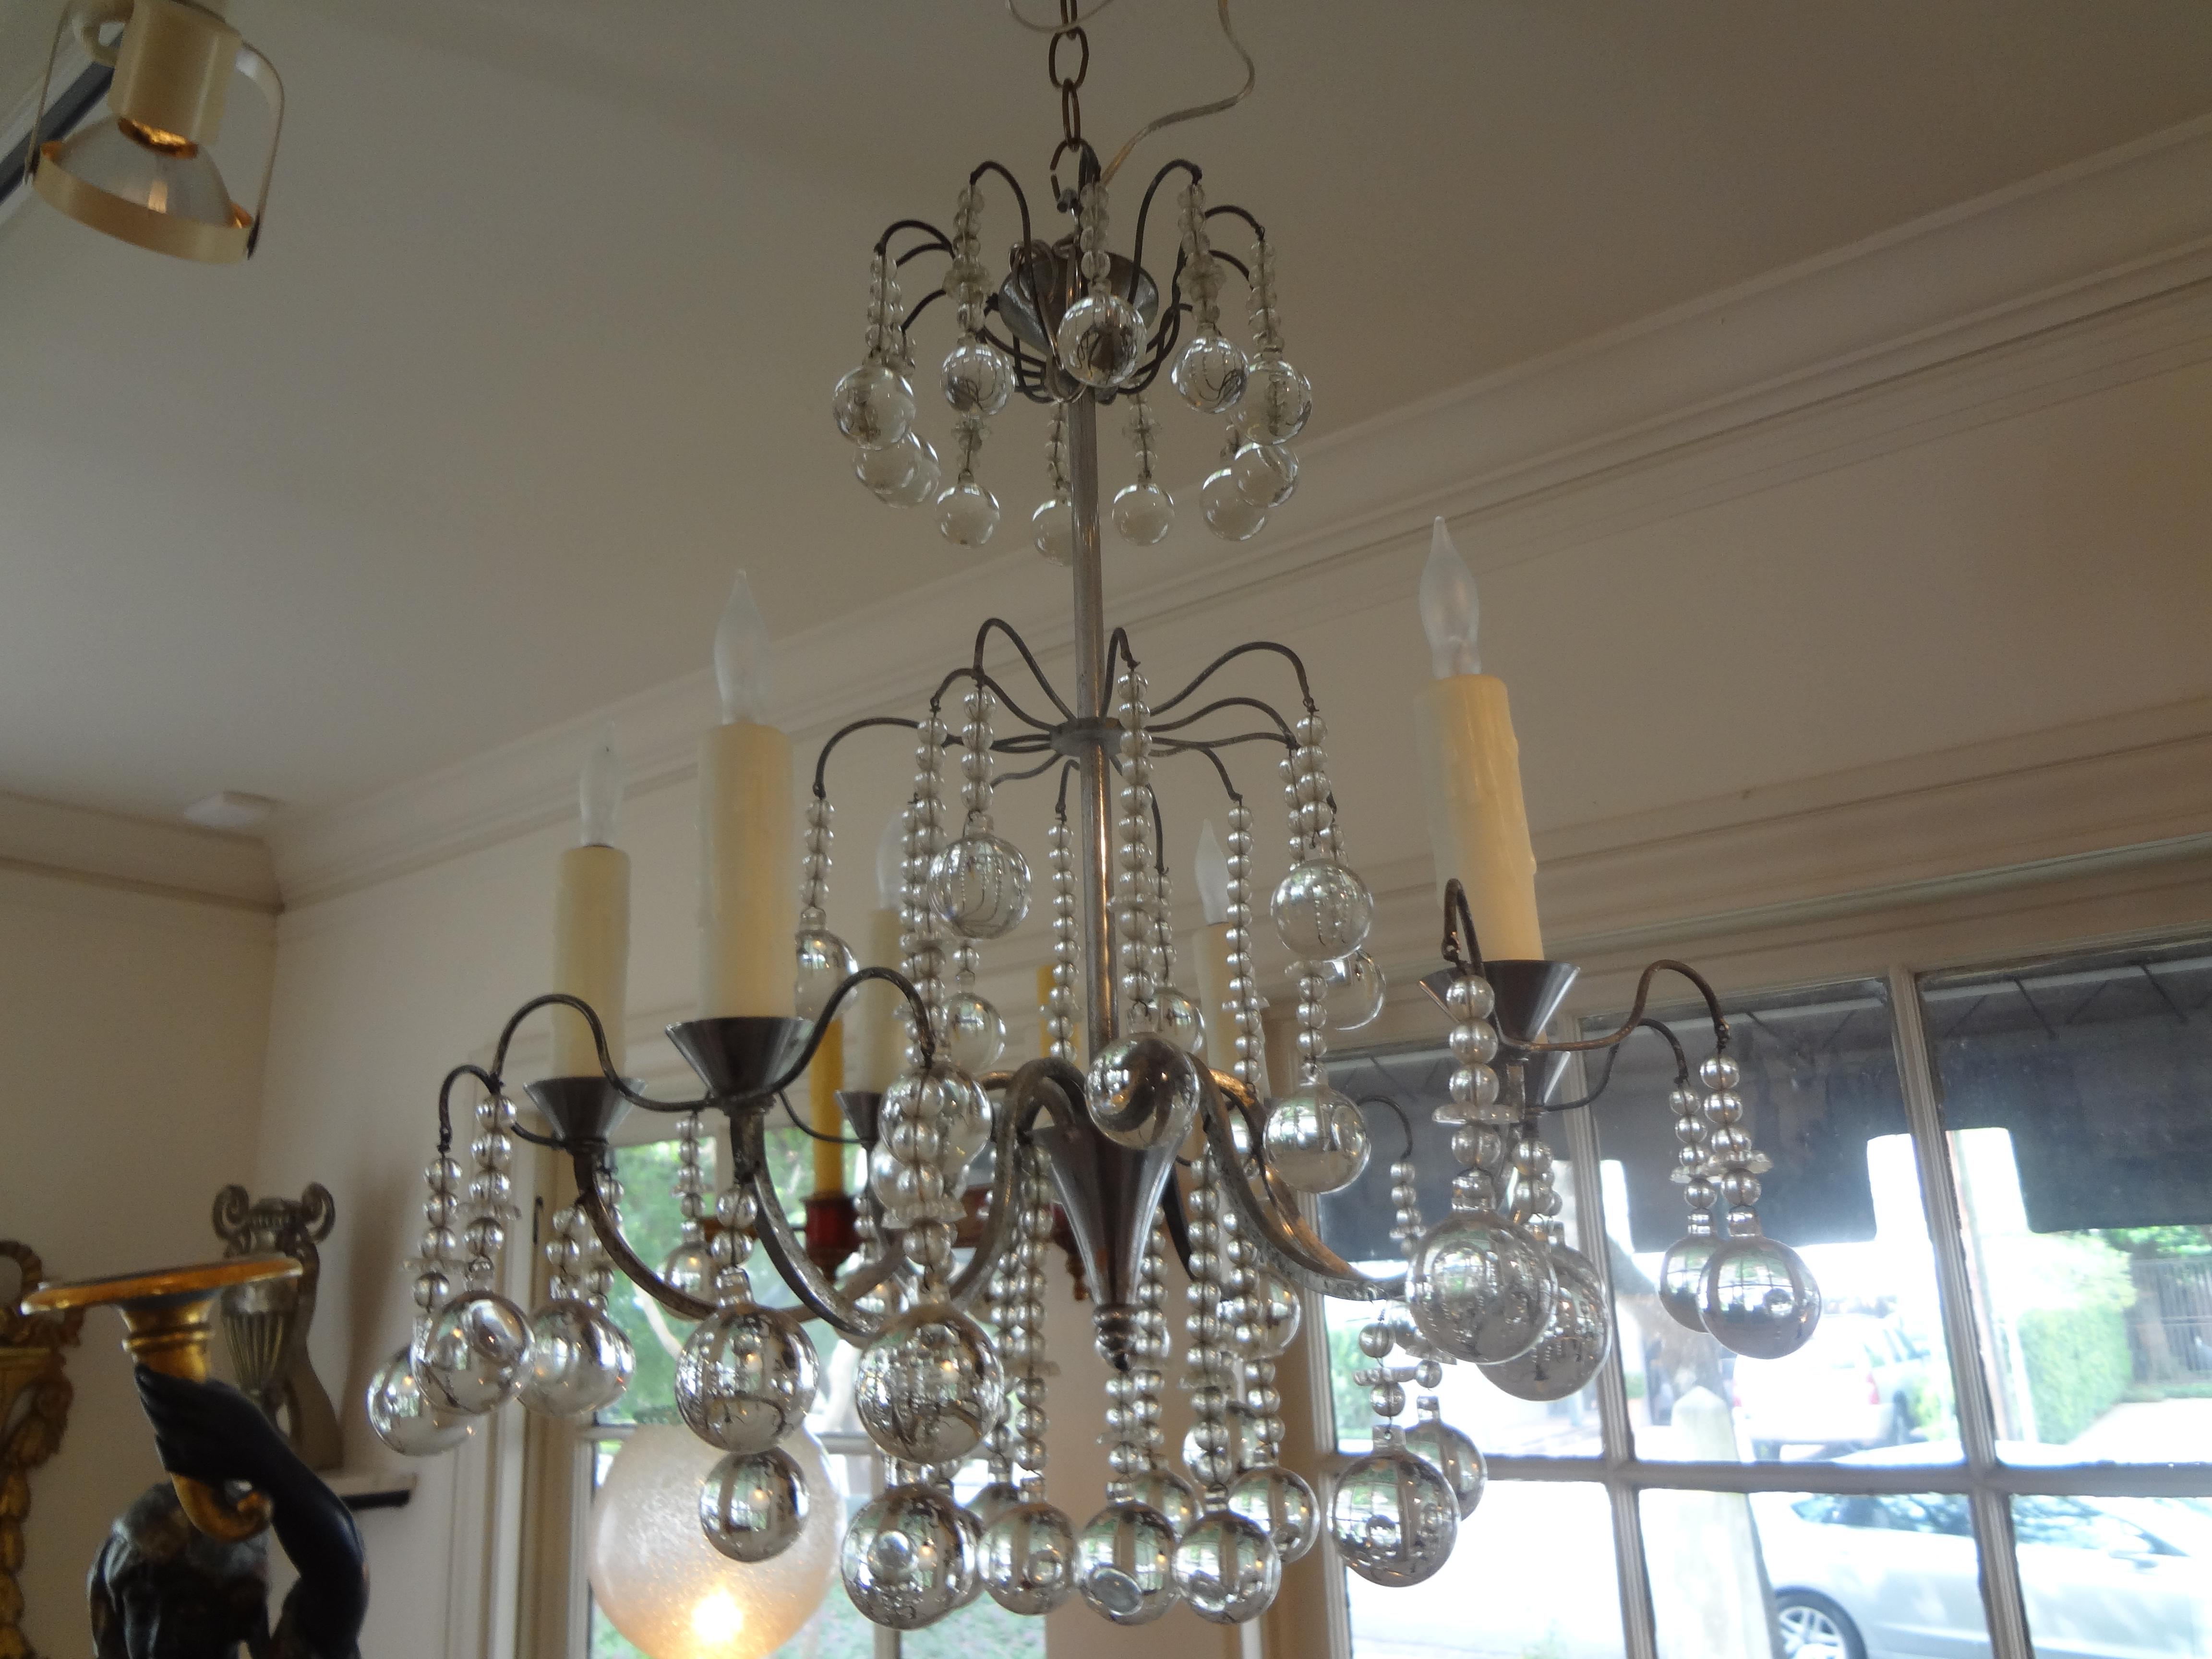 Stunning French Maison Baguès style silvered bronze and crystal chandelier. This beautiful French Louis XVI style crystal six-light chandelier has unusual sphere shaped crystals and has been newly wired for the U.S. market. Needed height can be